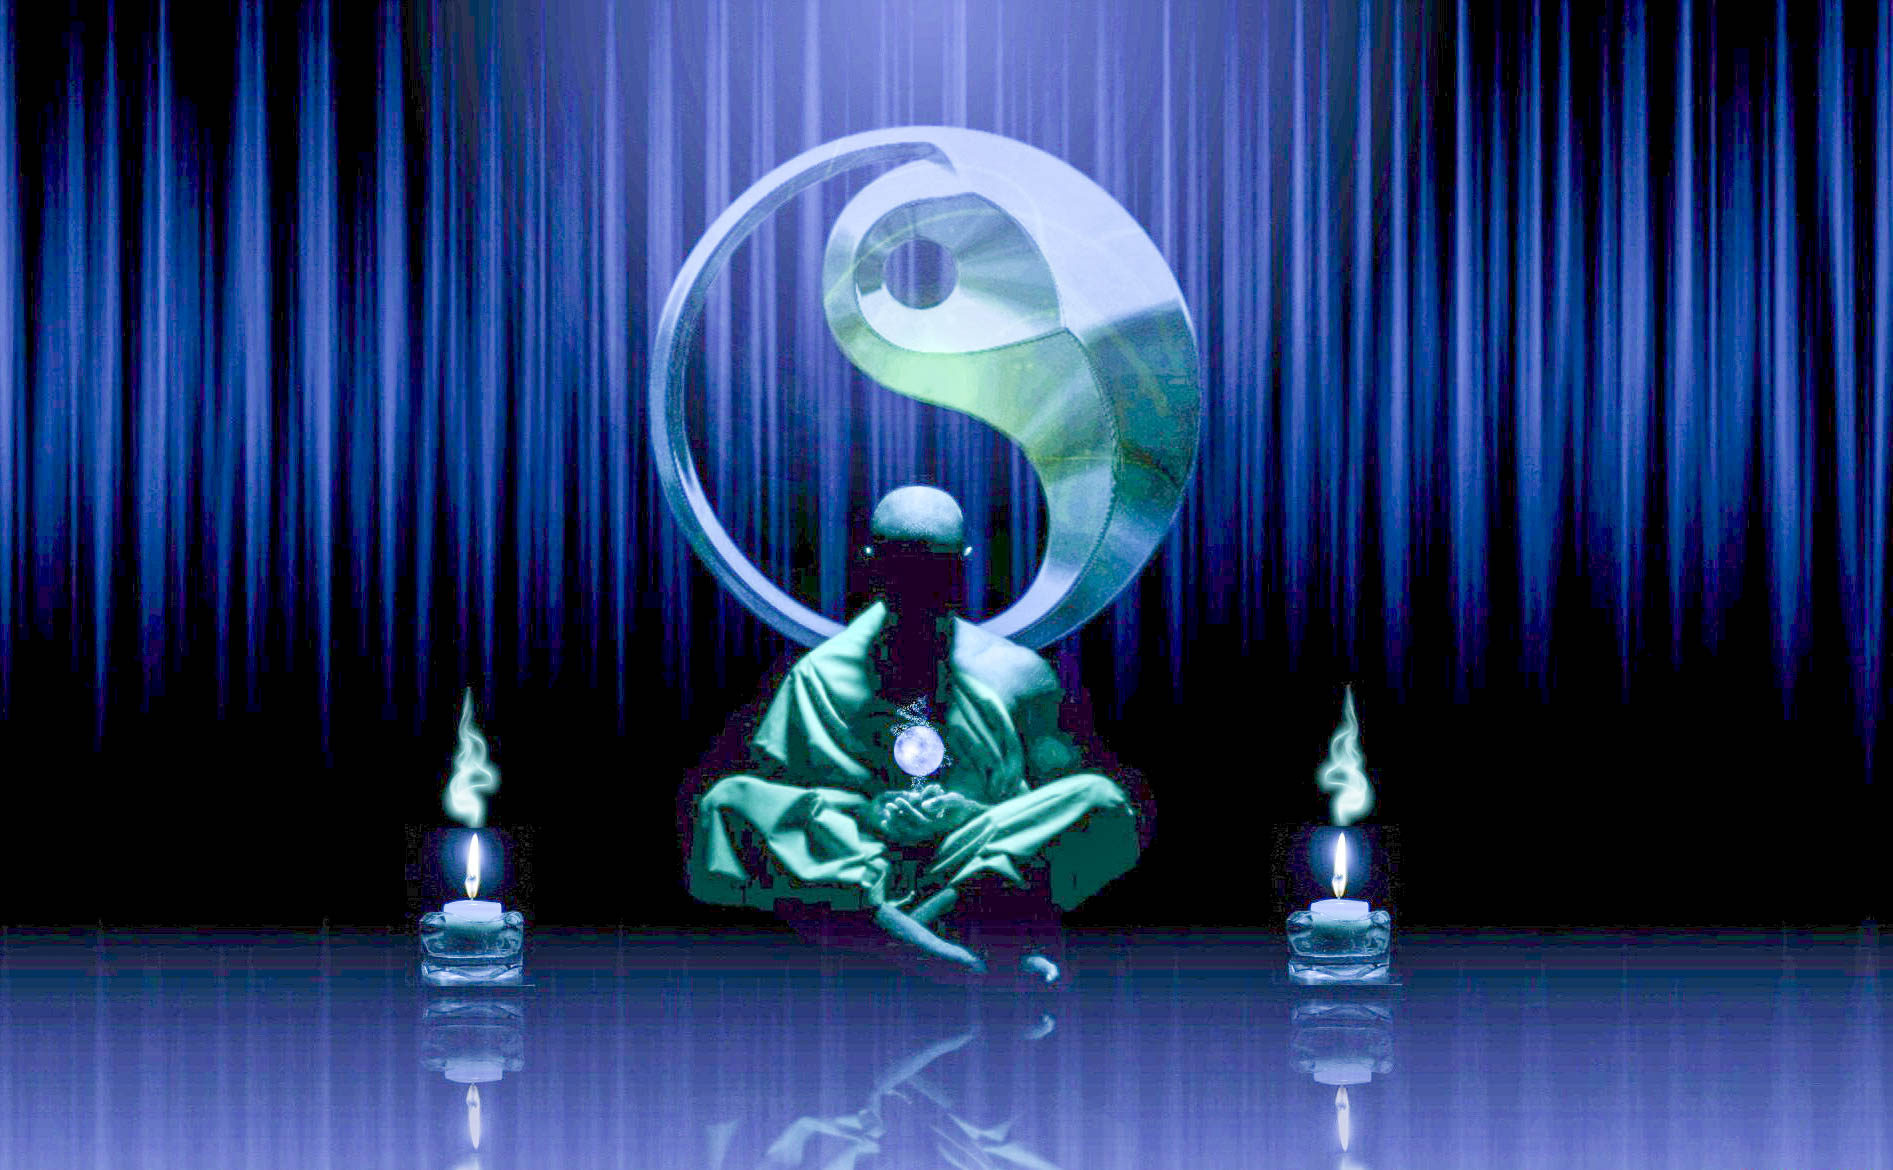 wallpaper ying yang,stage,performance,graphics,theatrical scenery,performing arts